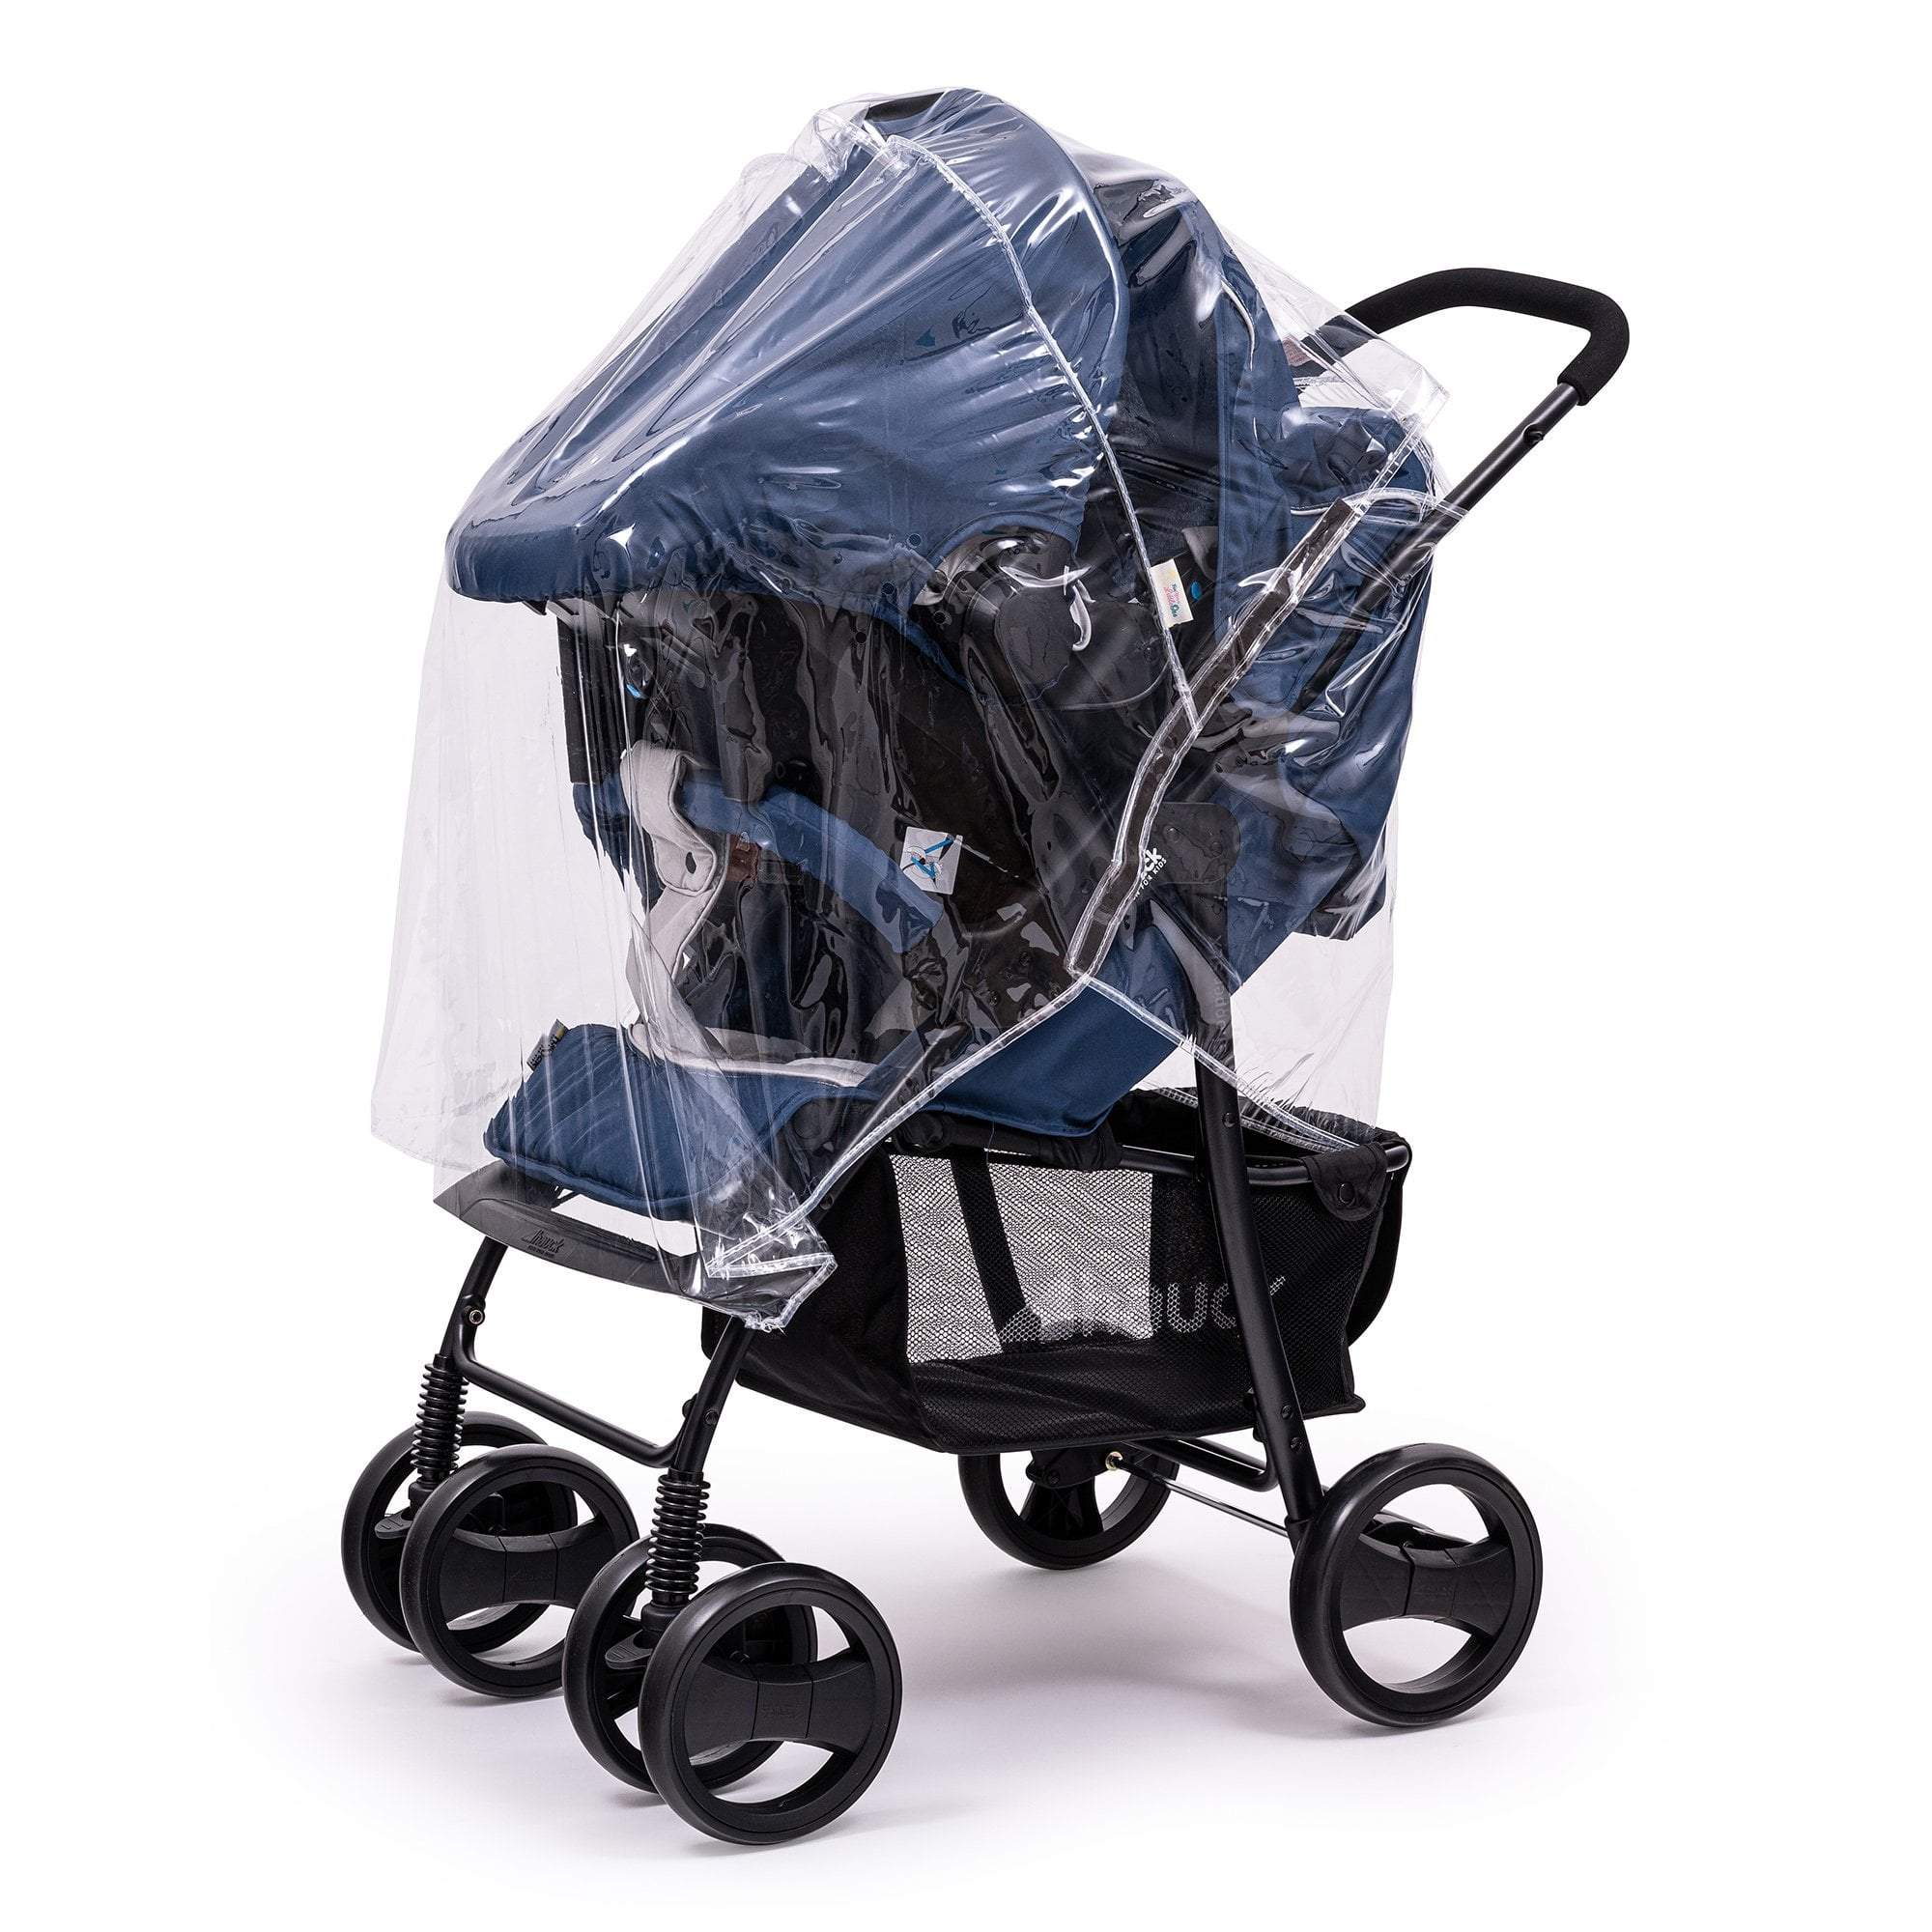 Travel System Raincover Compatible with Peg Perego - Fits All Models - For Your Little One